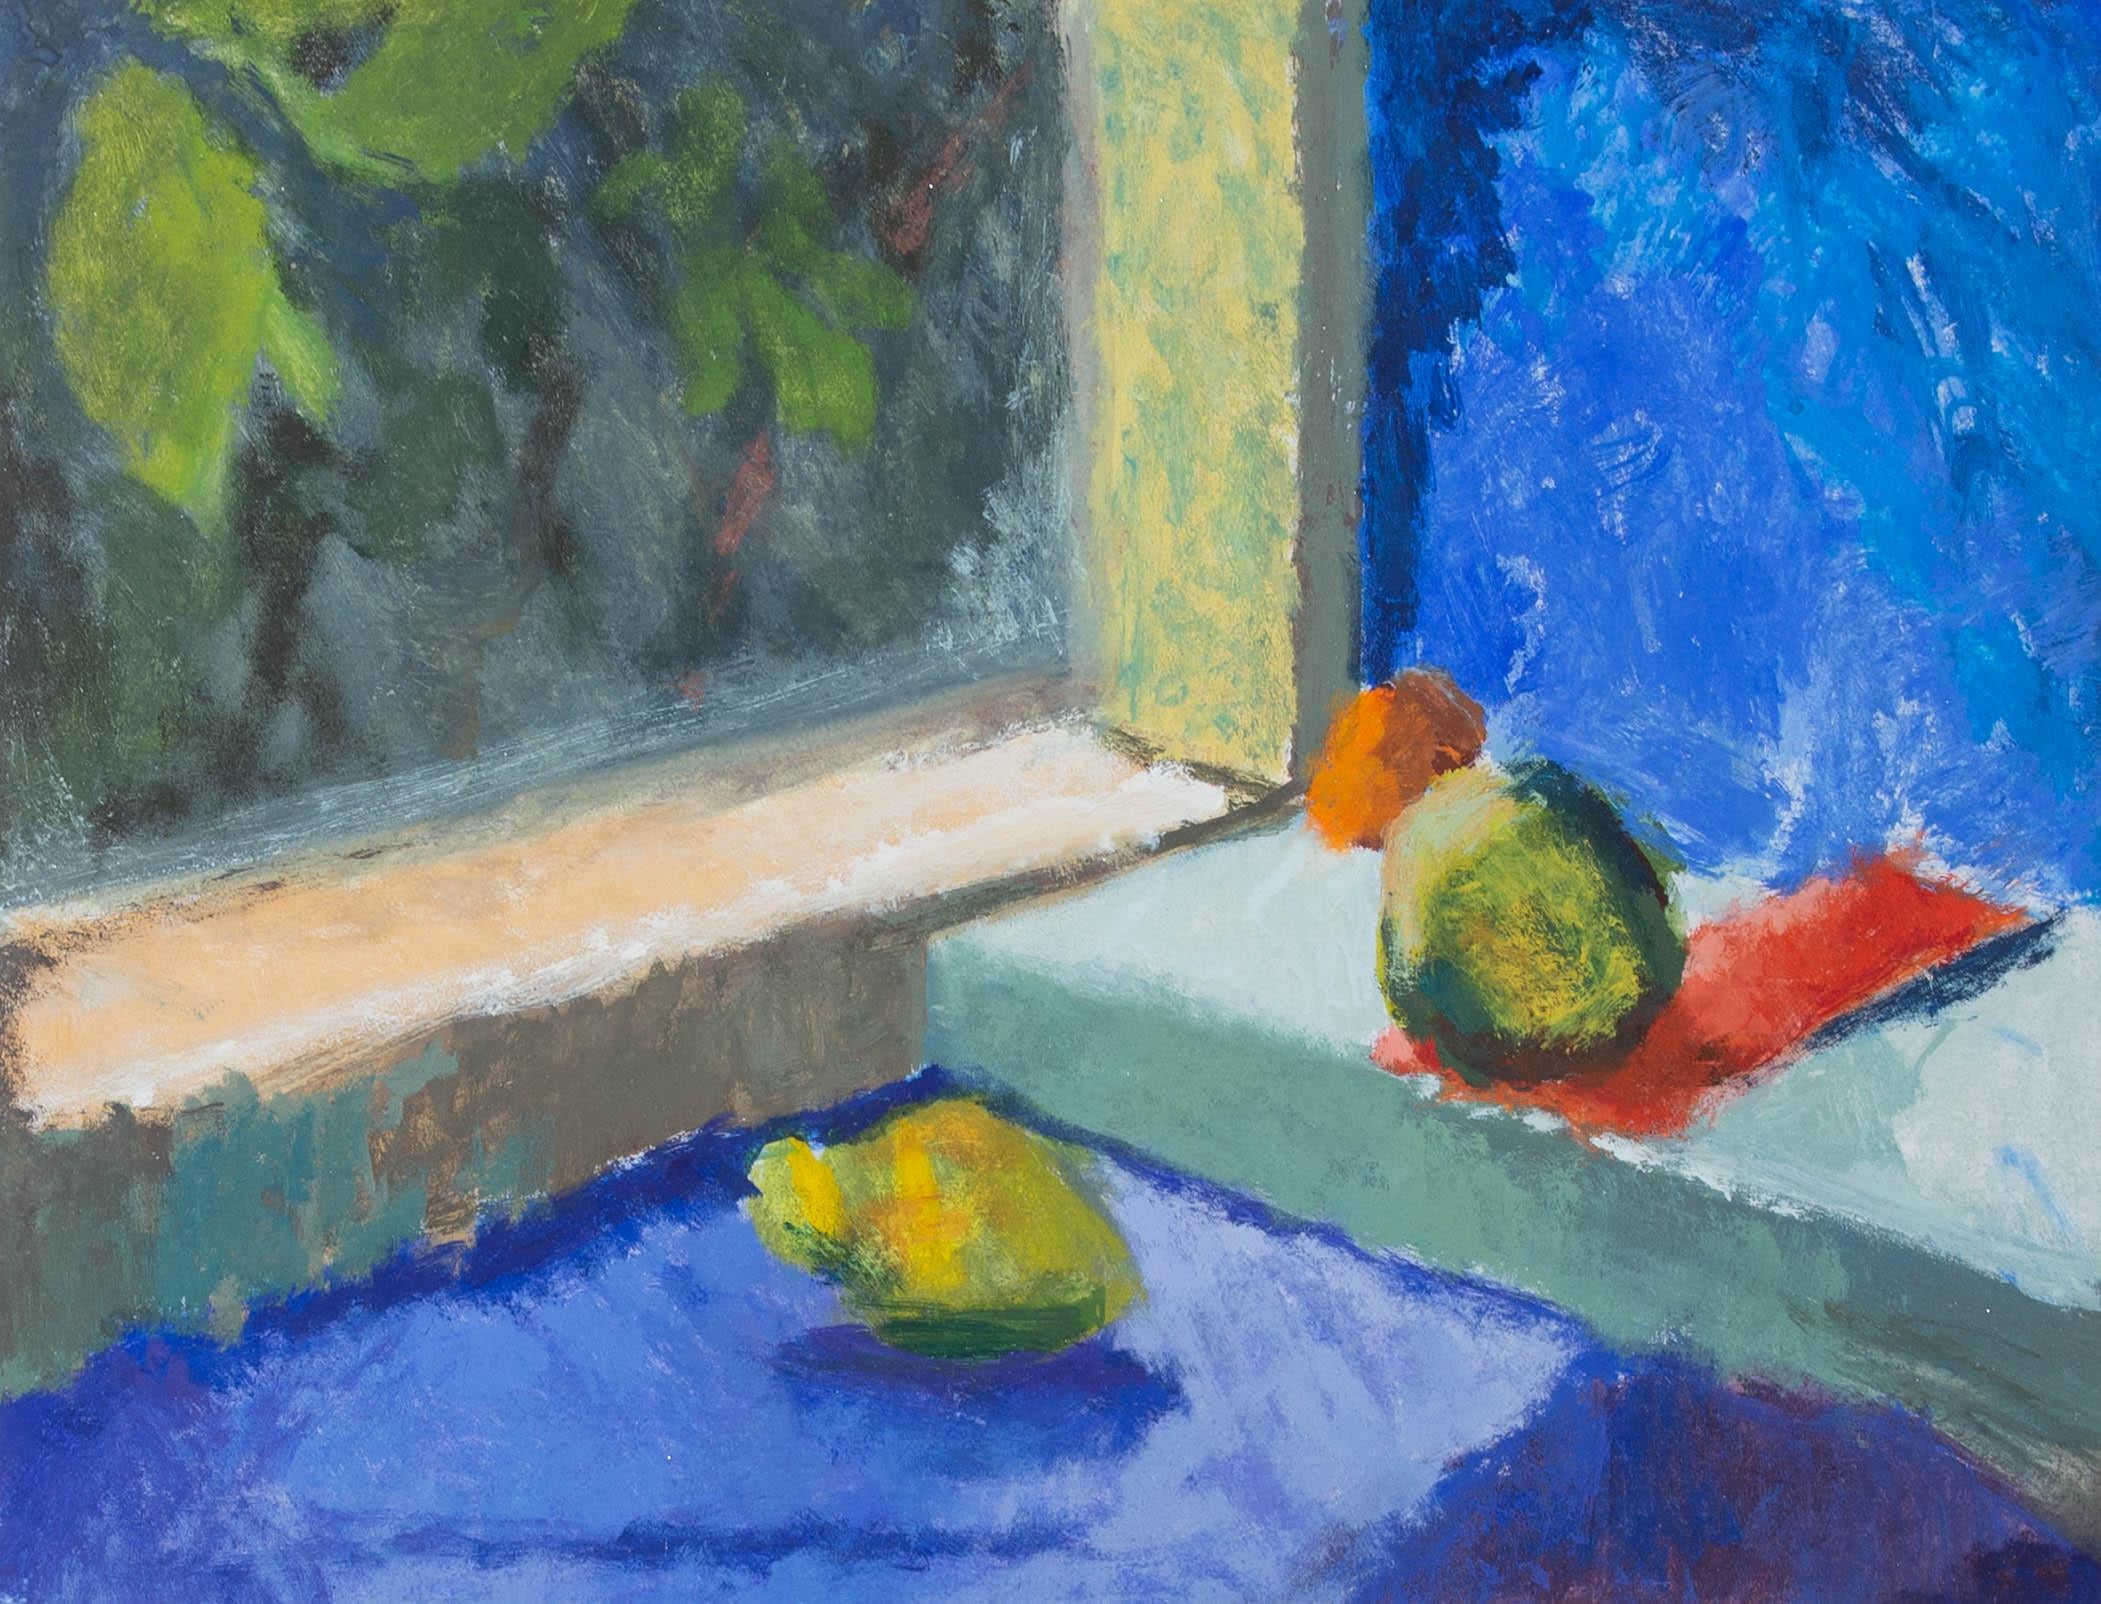 Framed Contemporary Gouache - Fauvist Still Life with Fruit - Art by Unknown